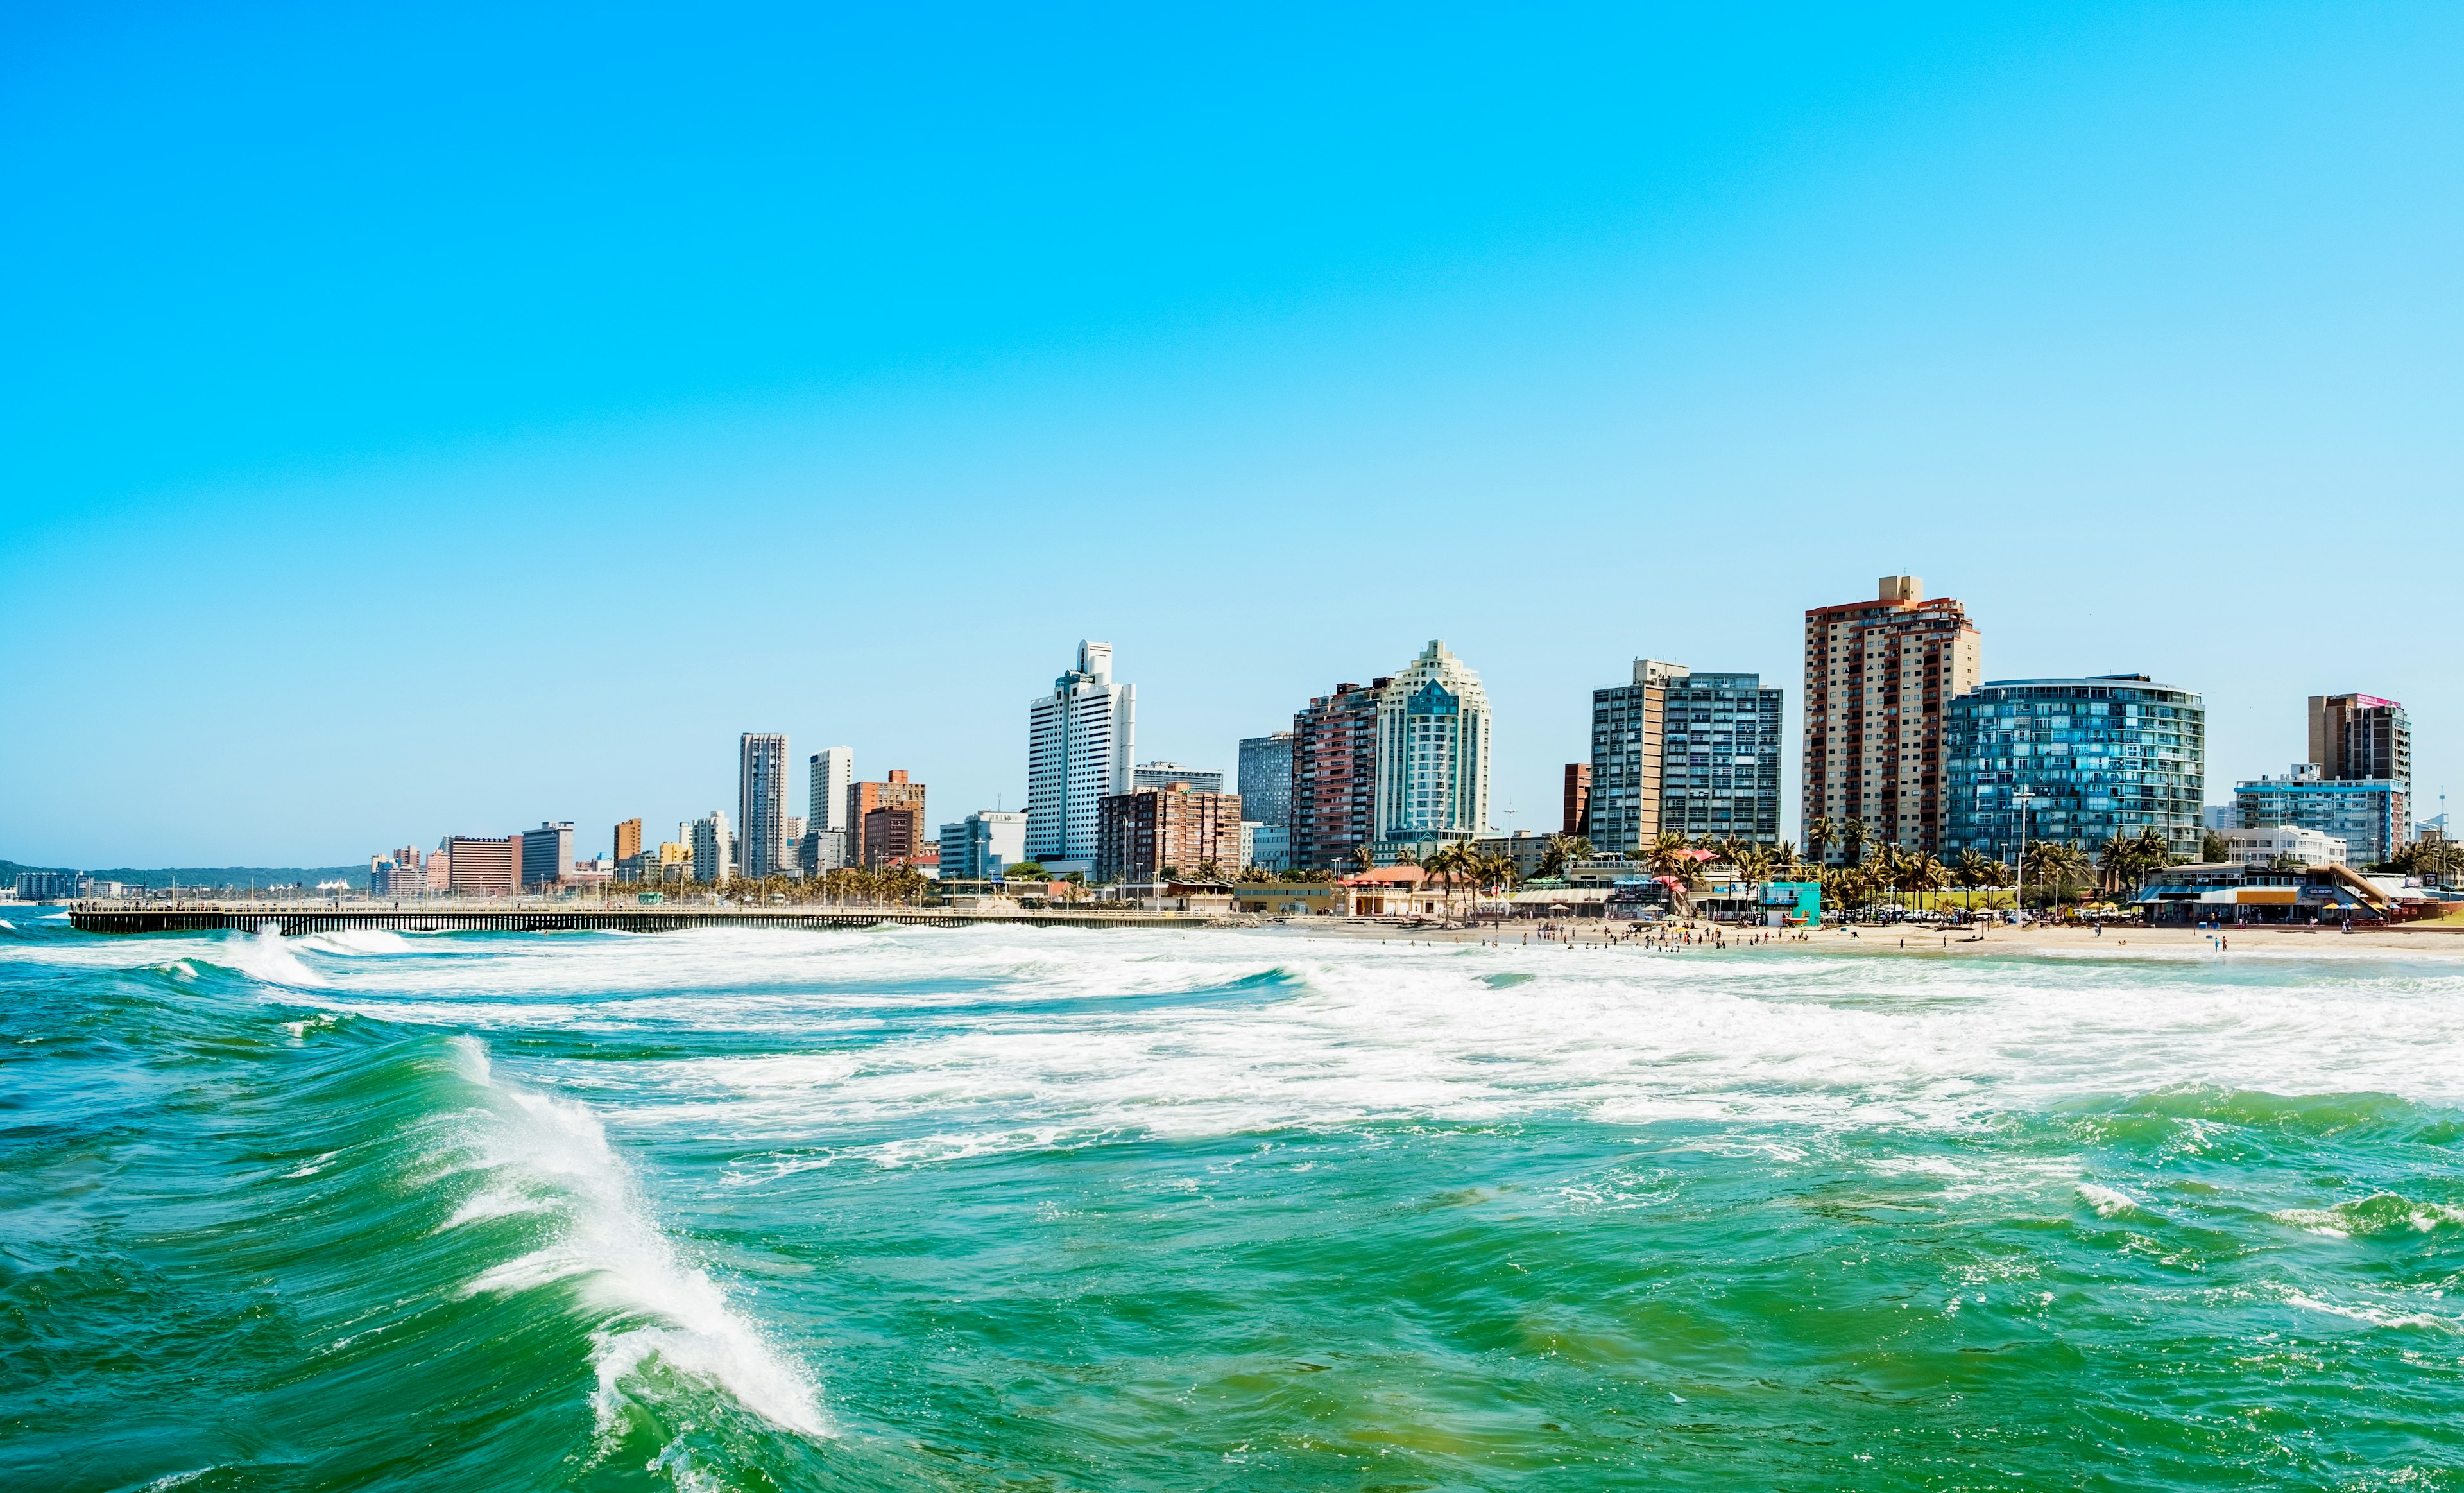 Sea waves with coastal high-rise in background, Durban.